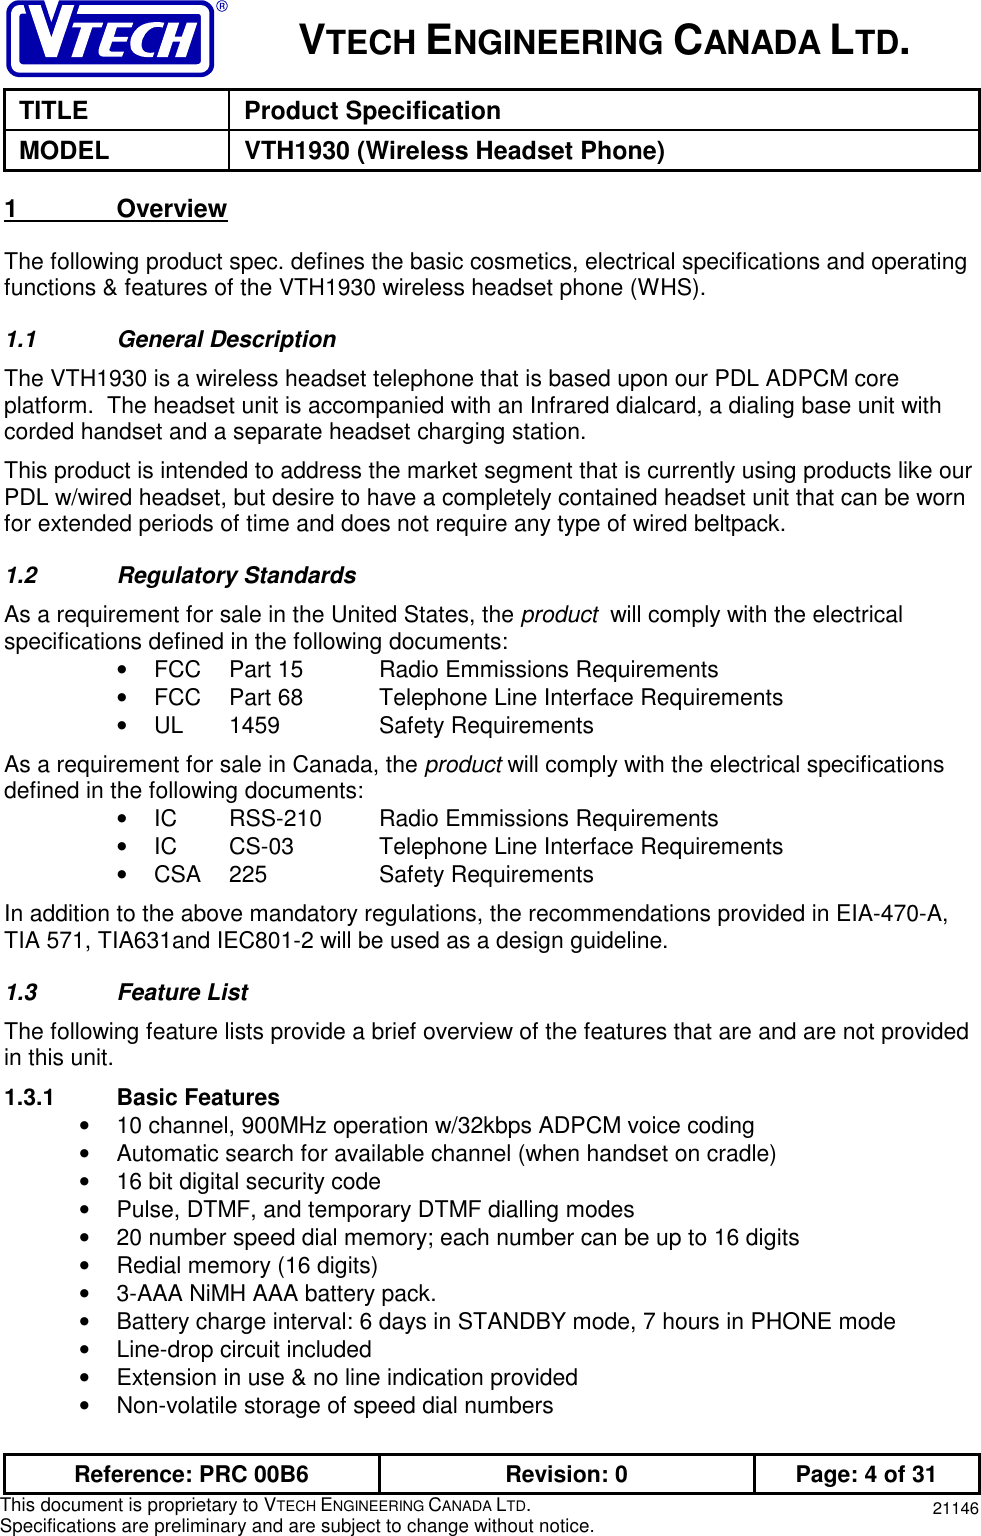 VTECH ENGINEERING CANADA LTD.TITLE Product SpecificationMODEL VTH1930 (Wireless Headset Phone)Reference: PRC 00B6 Revision: 0 Page: 4 of 31This document is proprietary to VTECH ENGINEERING CANADA LTD.Specifications are preliminary and are subject to change without notice. 211461               OverviewThe following product spec. defines the basic cosmetics, electrical specifications and operatingfunctions &amp; features of the VTH1930 wireless headset phone (WHS).1.1 General DescriptionThe VTH1930 is a wireless headset telephone that is based upon our PDL ADPCM coreplatform.  The headset unit is accompanied with an Infrared dialcard, a dialing base unit withcorded handset and a separate headset charging station.This product is intended to address the market segment that is currently using products like ourPDL w/wired headset, but desire to have a completely contained headset unit that can be wornfor extended periods of time and does not require any type of wired beltpack.1.2 Regulatory StandardsAs a requirement for sale in the United States, the product  will comply with the electricalspecifications defined in the following documents:•  FCC Part 15 Radio Emmissions Requirements•  FCC Part 68 Telephone Line Interface Requirements• UL 1459 Safety RequirementsAs a requirement for sale in Canada, the product will comply with the electrical specificationsdefined in the following documents:•  IC RSS-210 Radio Emmissions Requirements•  IC CS-03 Telephone Line Interface Requirements• CSA 225 Safety RequirementsIn addition to the above mandatory regulations, the recommendations provided in EIA-470-A,TIA 571, TIA631and IEC801-2 will be used as a design guideline.1.3 Feature ListThe following feature lists provide a brief overview of the features that are and are not providedin this unit.1.3.1 Basic Features•  10 channel, 900MHz operation w/32kbps ADPCM voice coding•  Automatic search for available channel (when handset on cradle)•  16 bit digital security code•  Pulse, DTMF, and temporary DTMF dialling modes•  20 number speed dial memory; each number can be up to 16 digits•  Redial memory (16 digits)•  3-AAA NiMH AAA battery pack.•  Battery charge interval: 6 days in STANDBY mode, 7 hours in PHONE mode•  Line-drop circuit included•  Extension in use &amp; no line indication provided•  Non-volatile storage of speed dial numbers